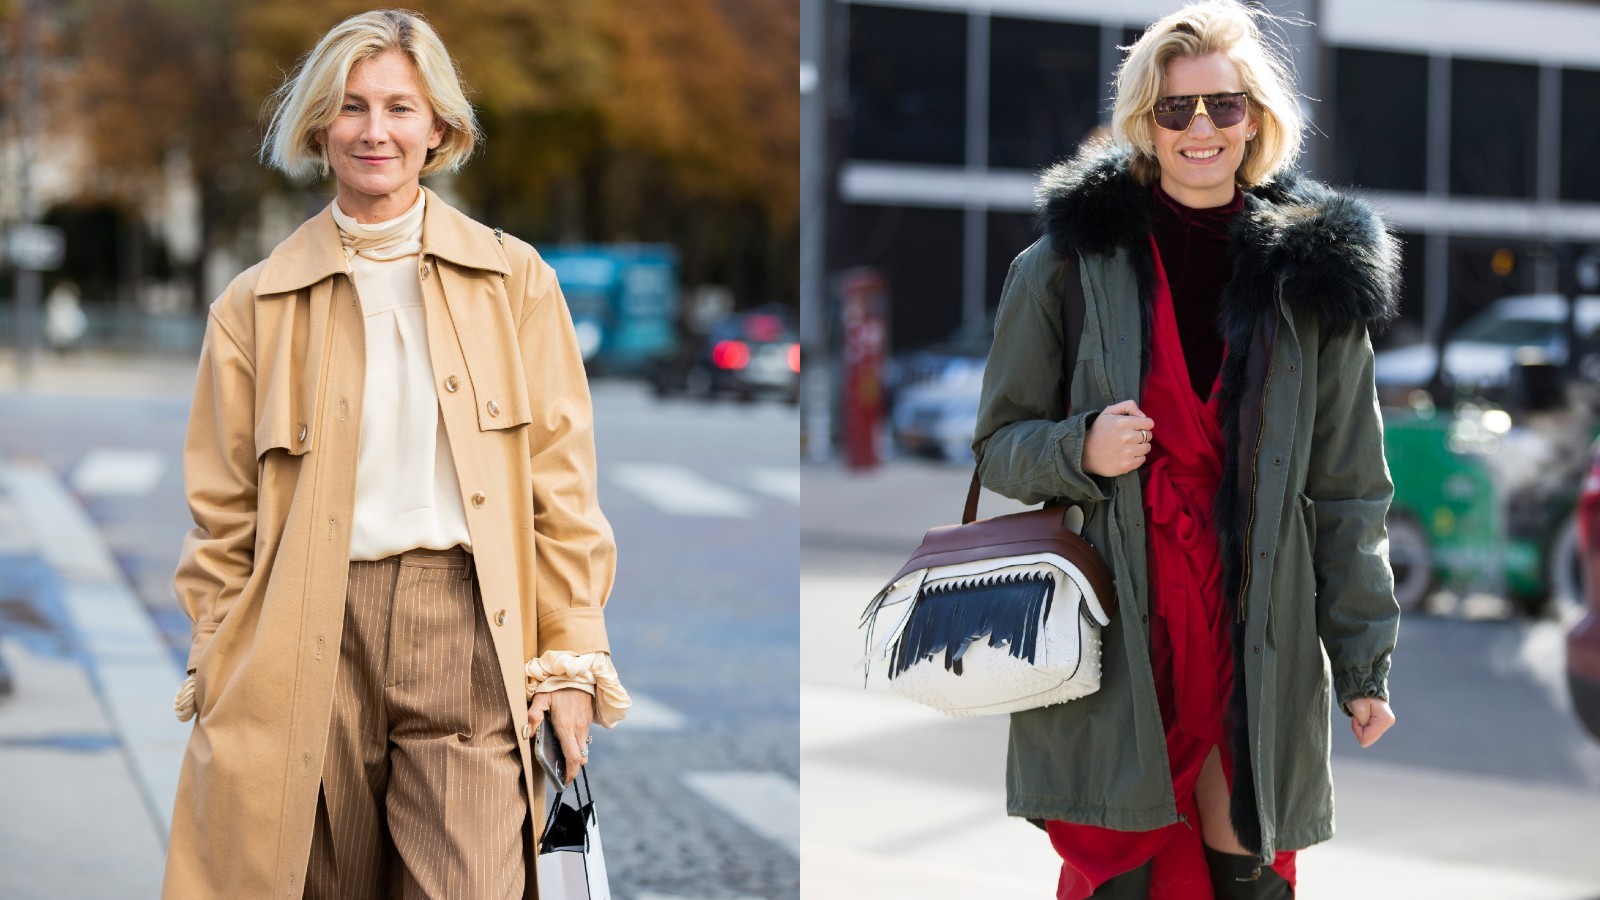 The trench coat vs parka coat: Which one is best? | Woman u0026 Home